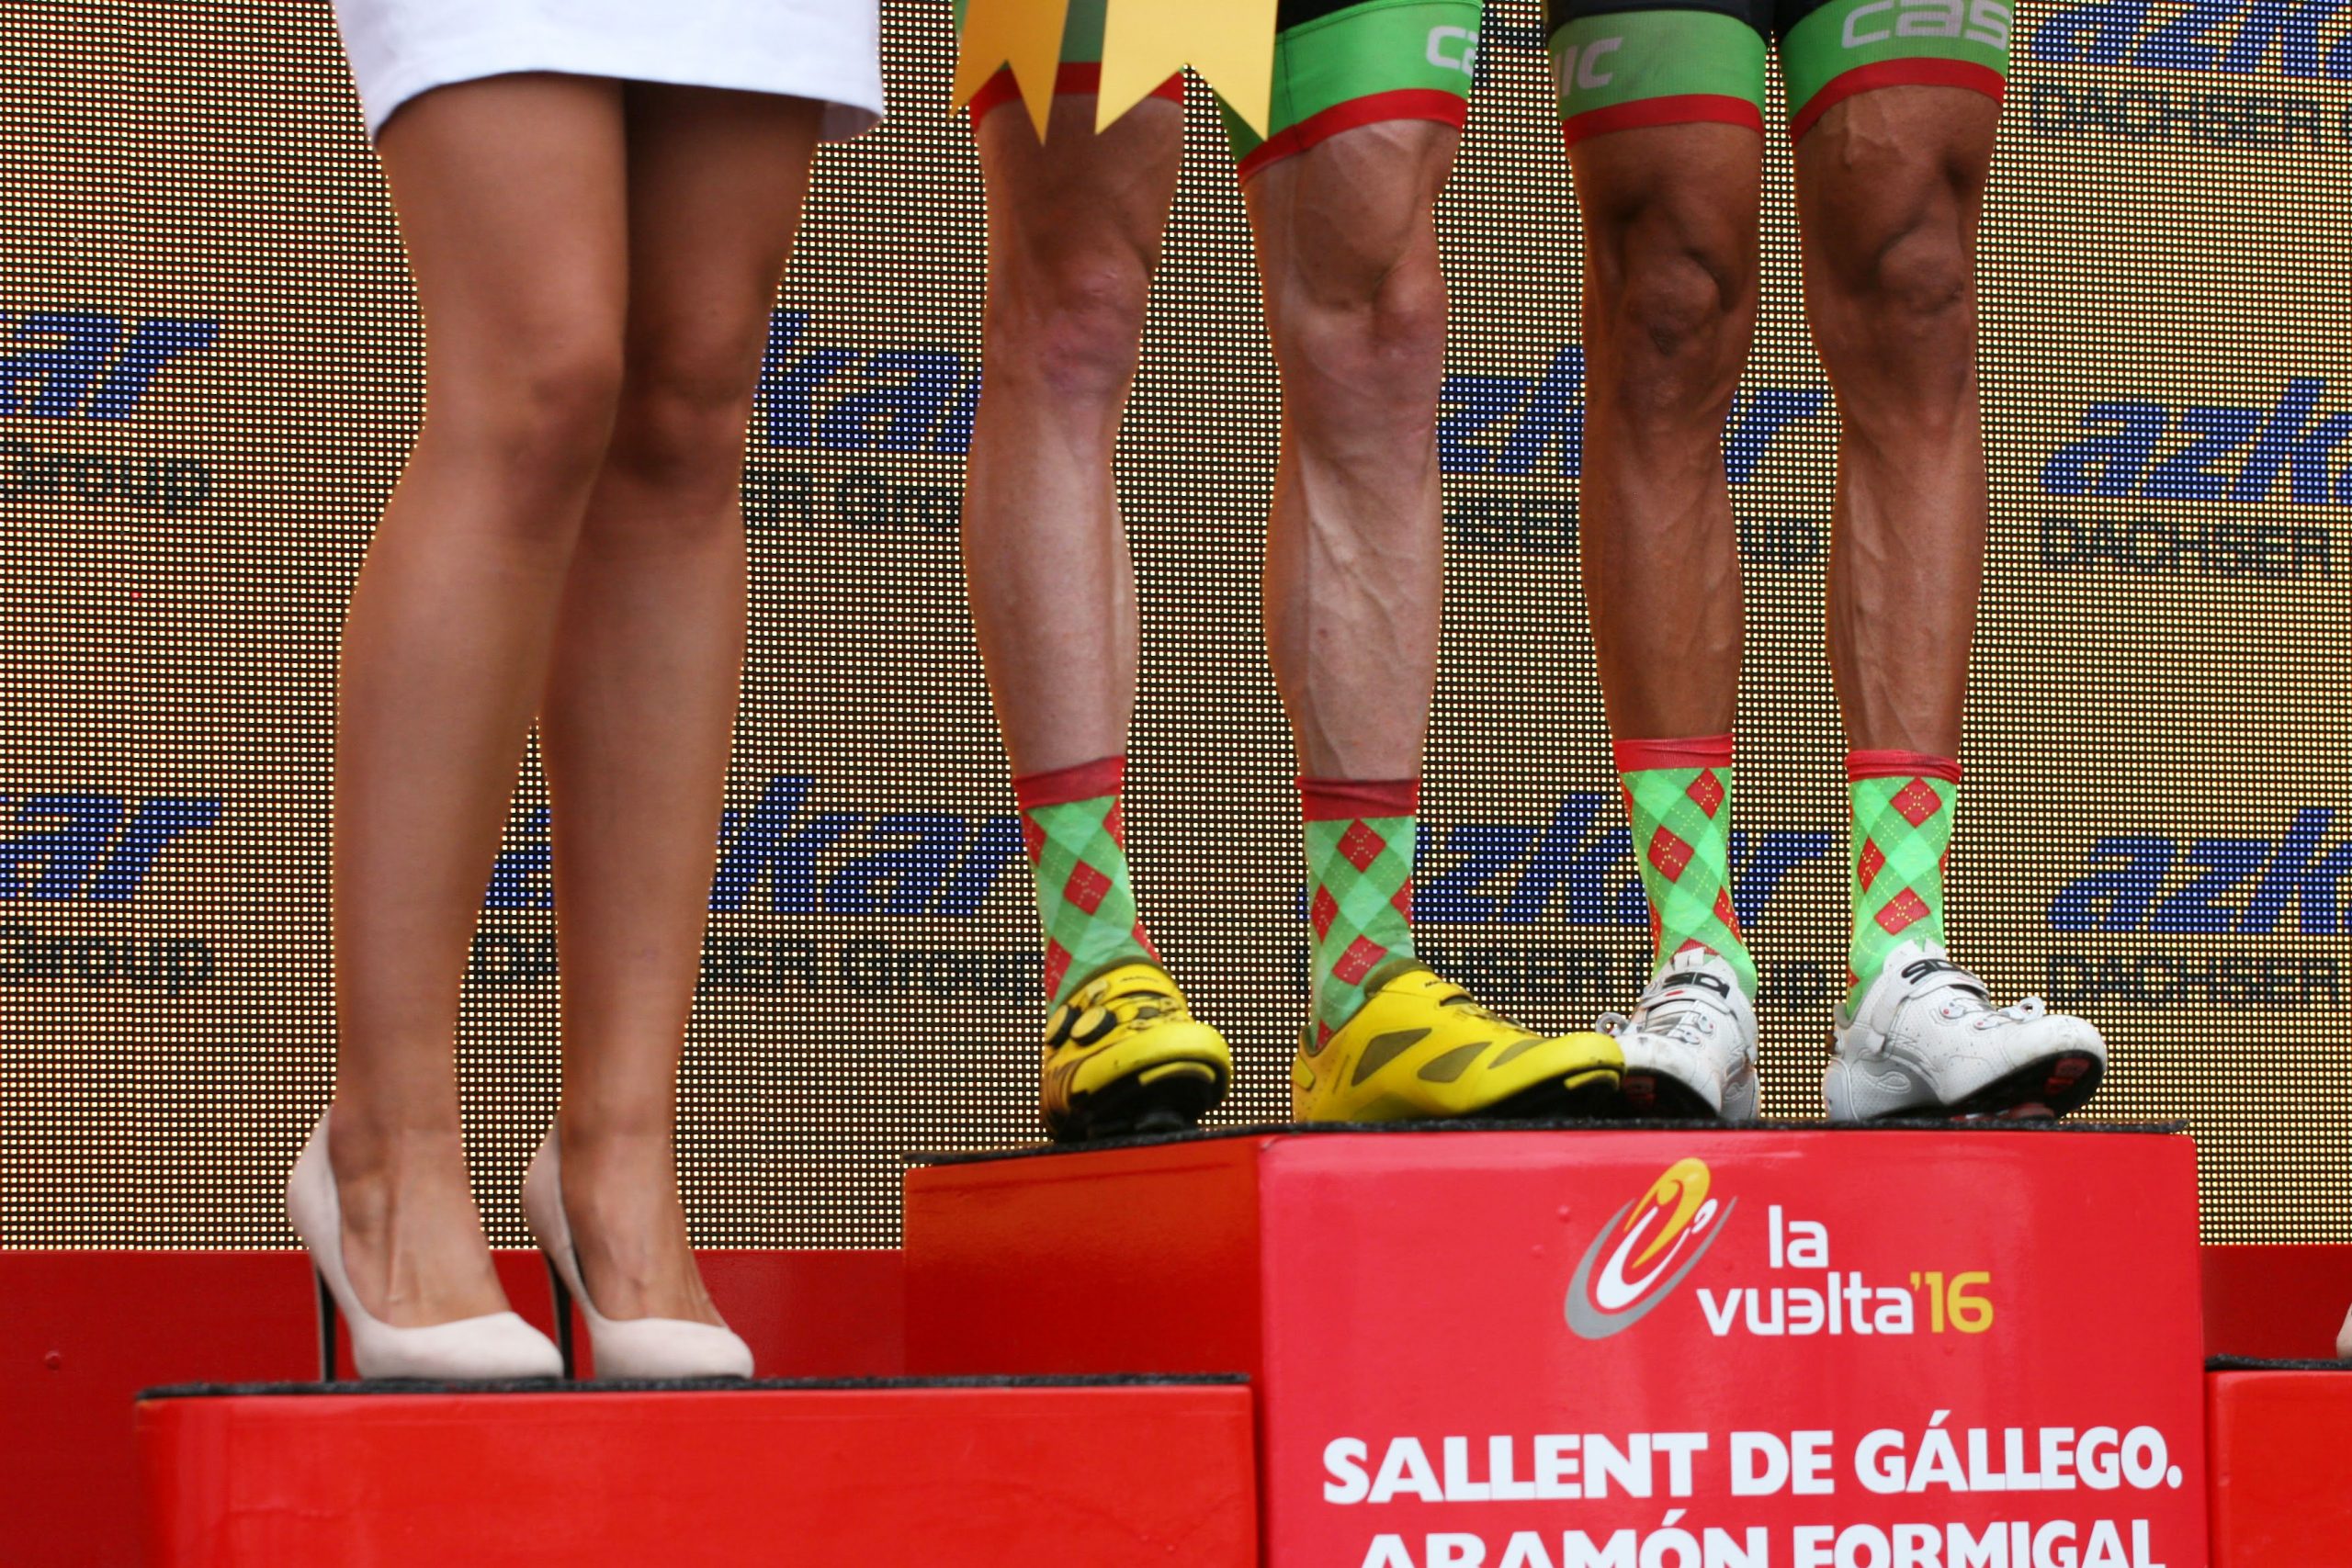 How to get good cycling legs